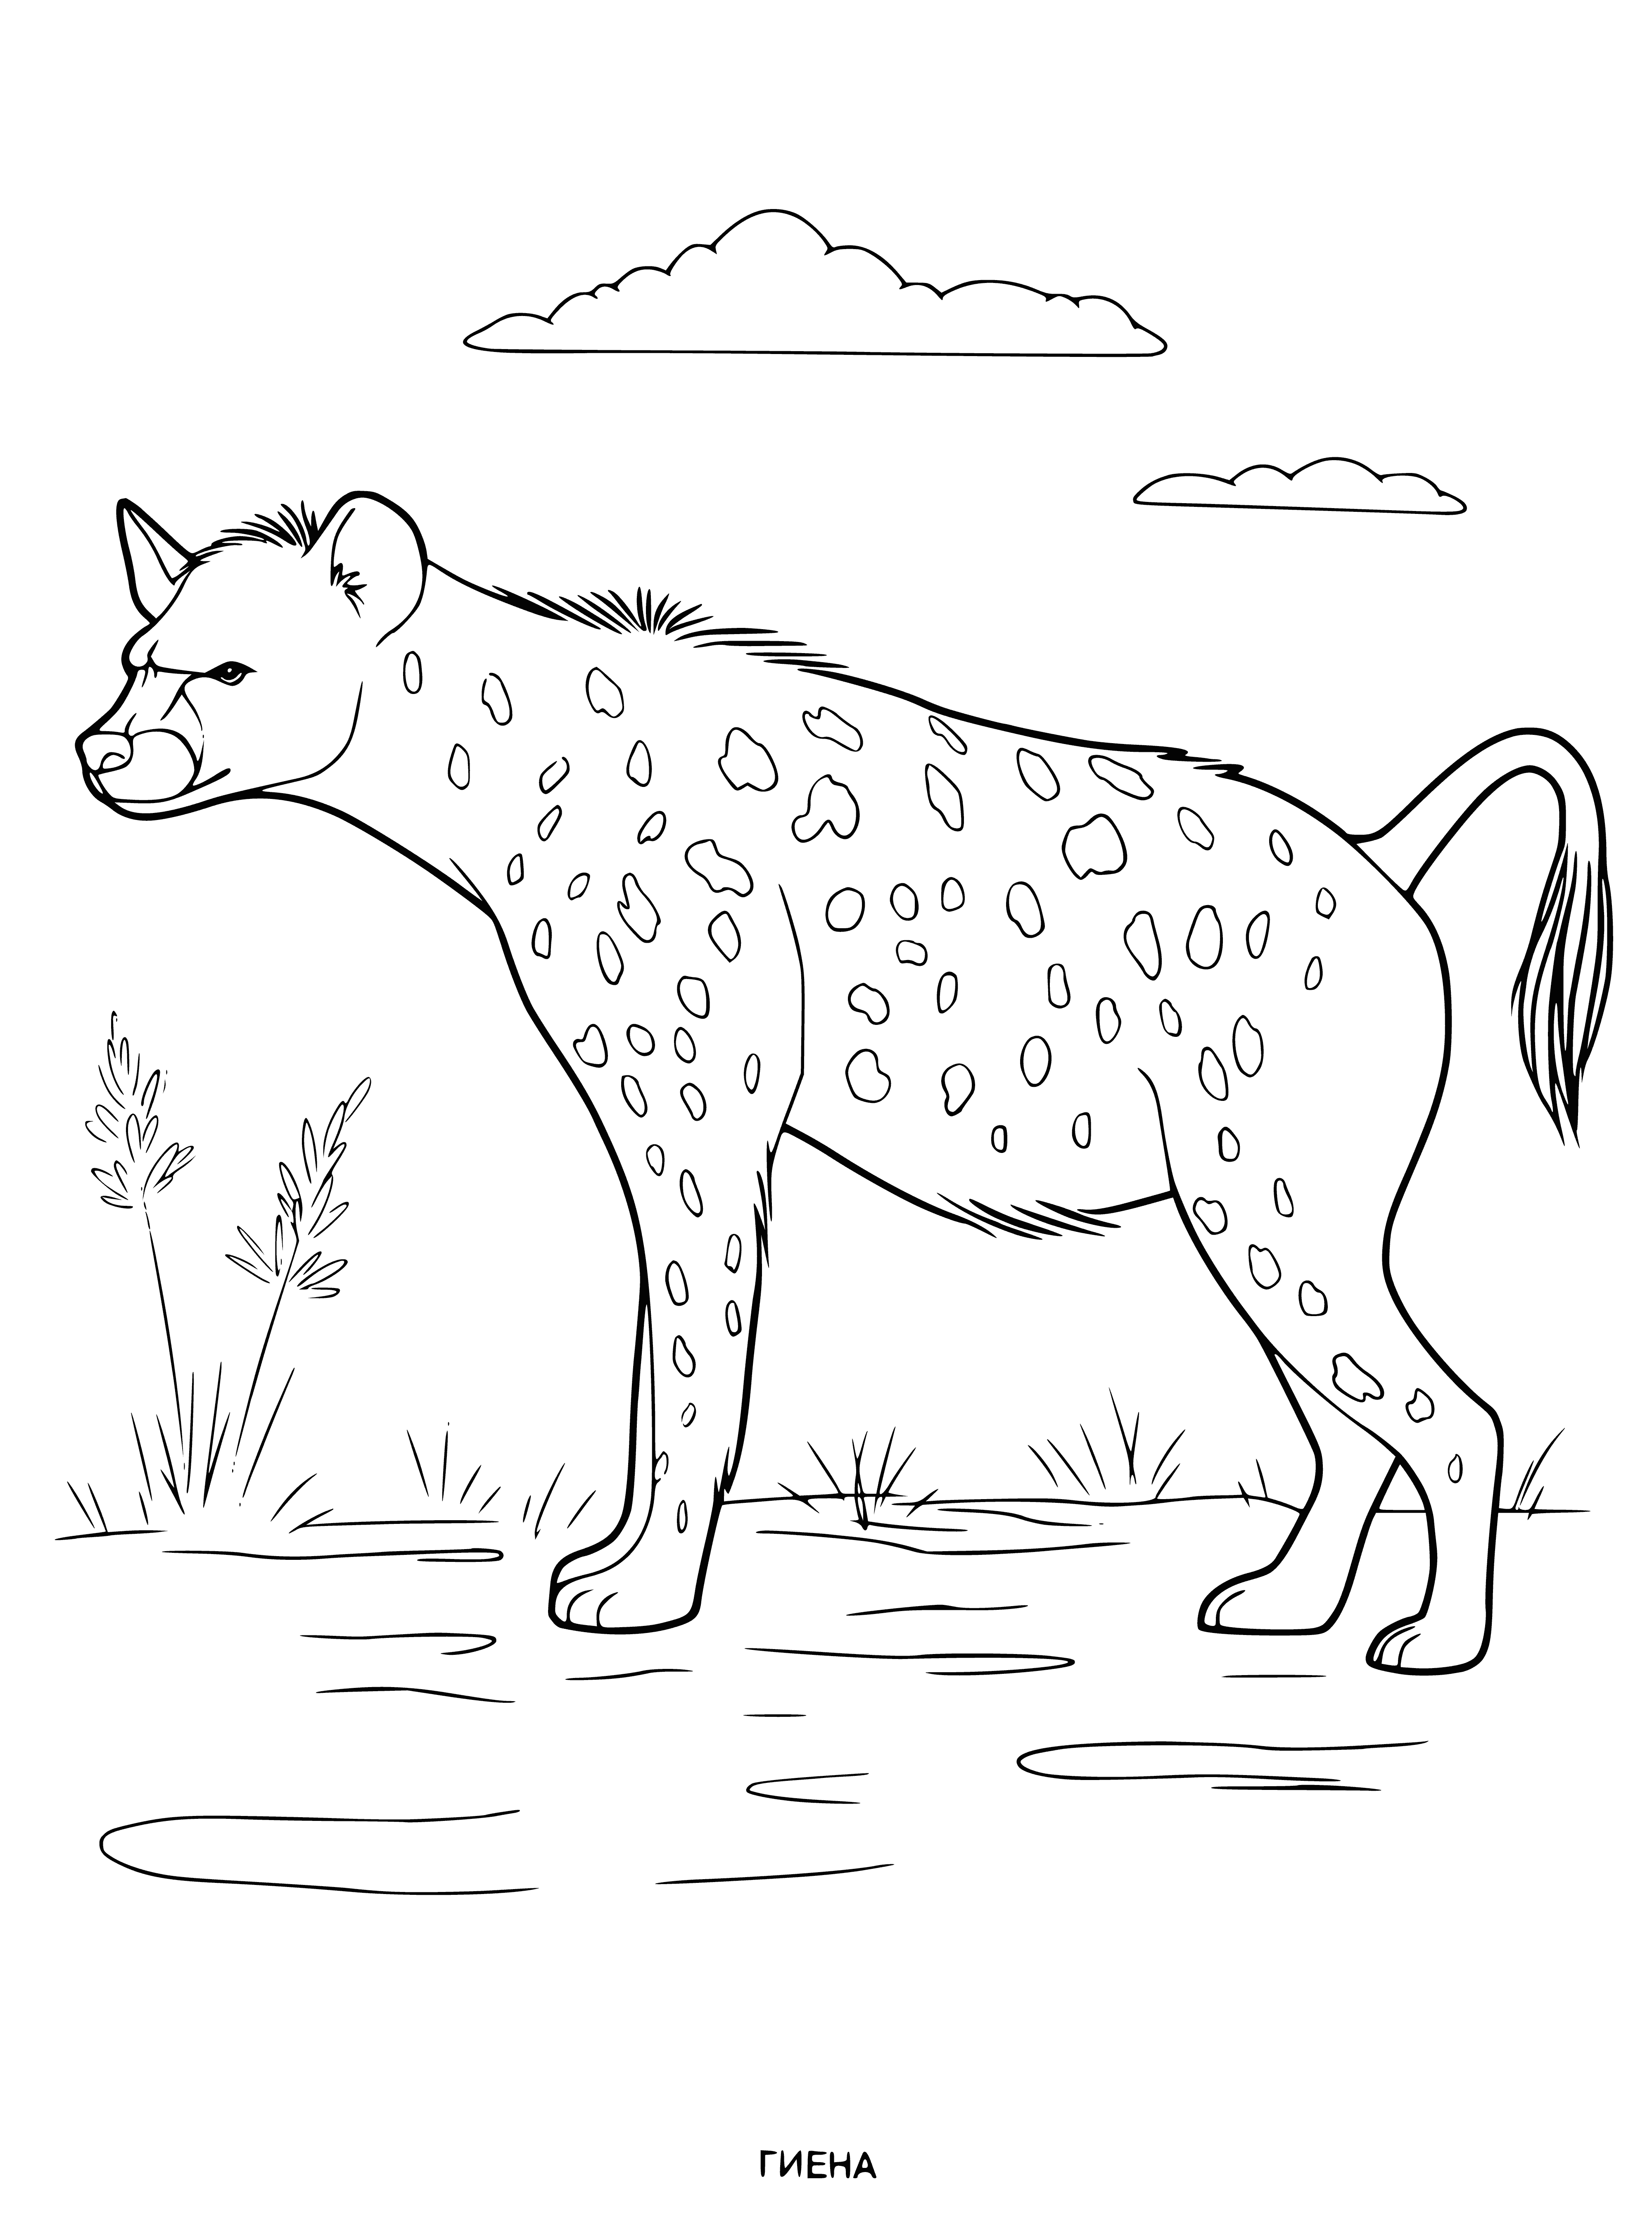 coloring page: Hyena: large African mammal related to dog; eats carcasses & small animals; known to eat people.